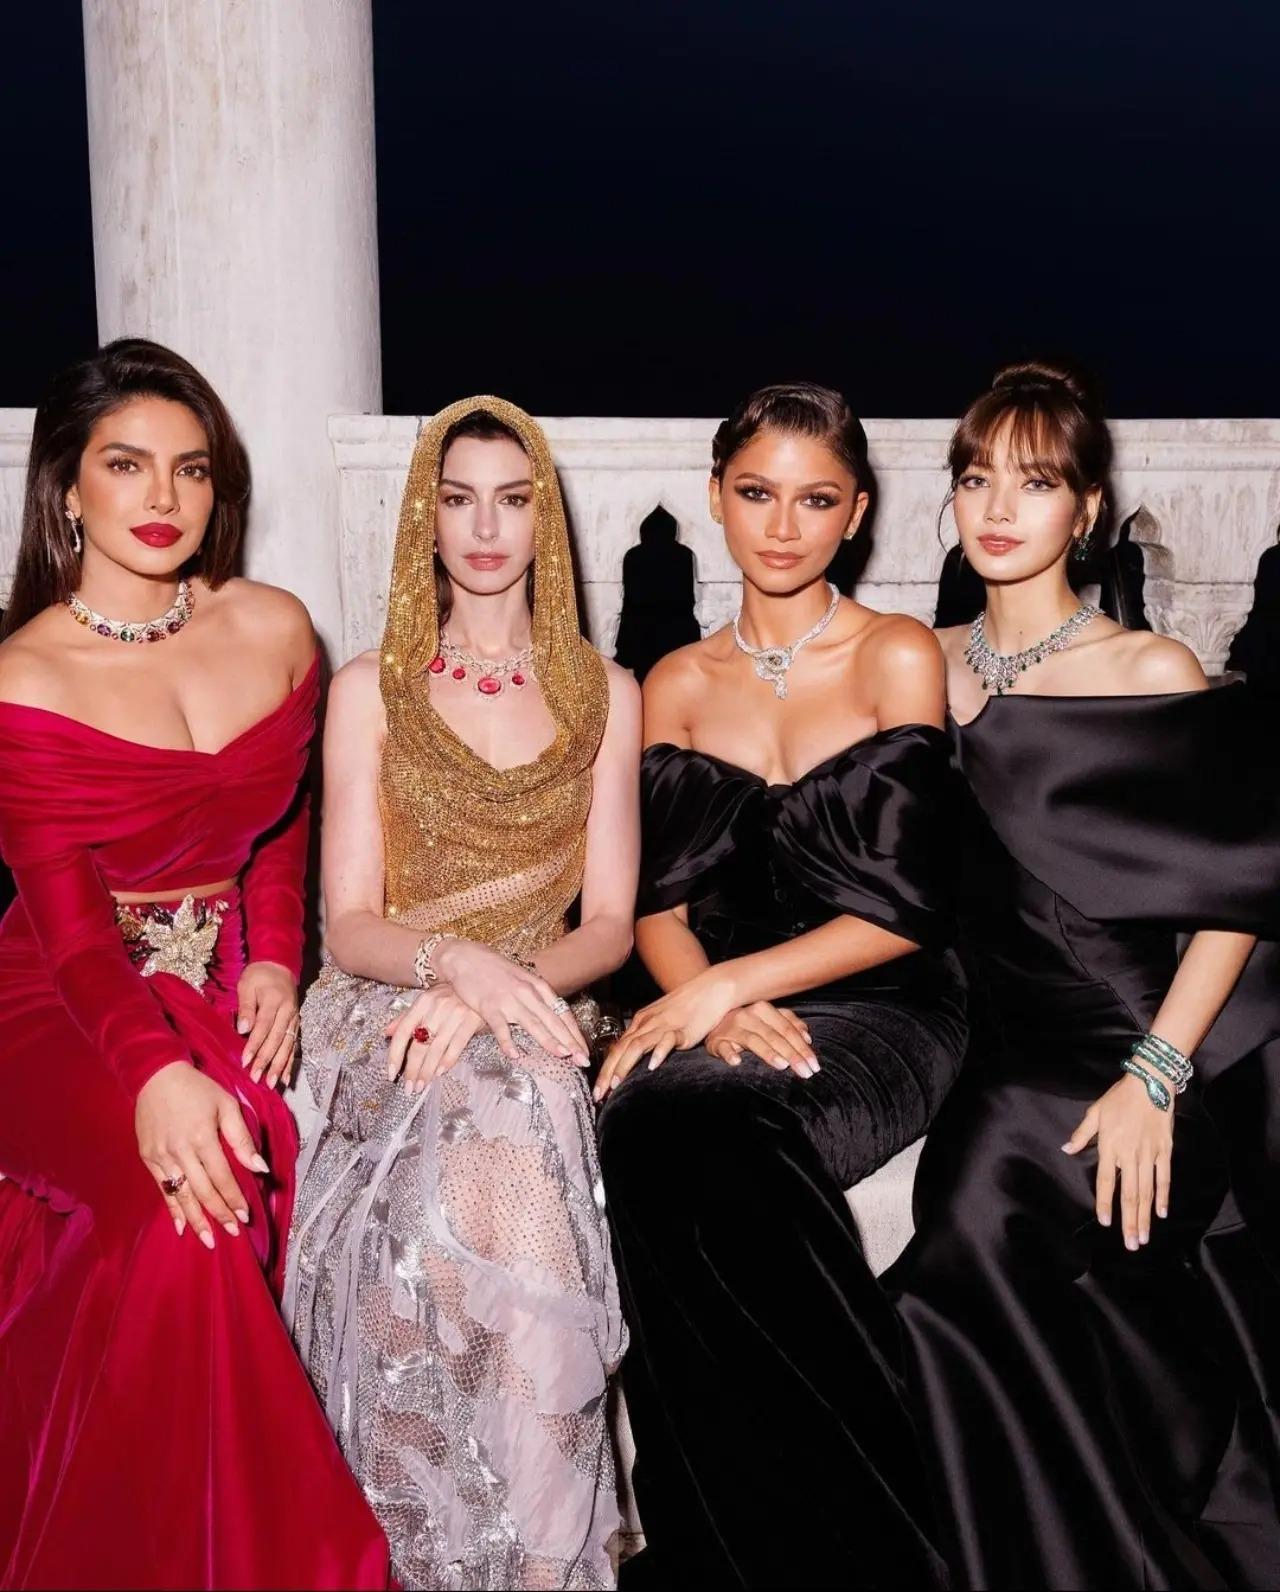 Priyanka Chopra Jonas is one of the global ambassadors of the luxury brand Bulgari. For a recent event hosted by the brand in Venice, the actress made a stunning appearance in red and posed alongside the likes of Anne Hathaway, Zendaya and Blackpink's Lisa. View all pics here